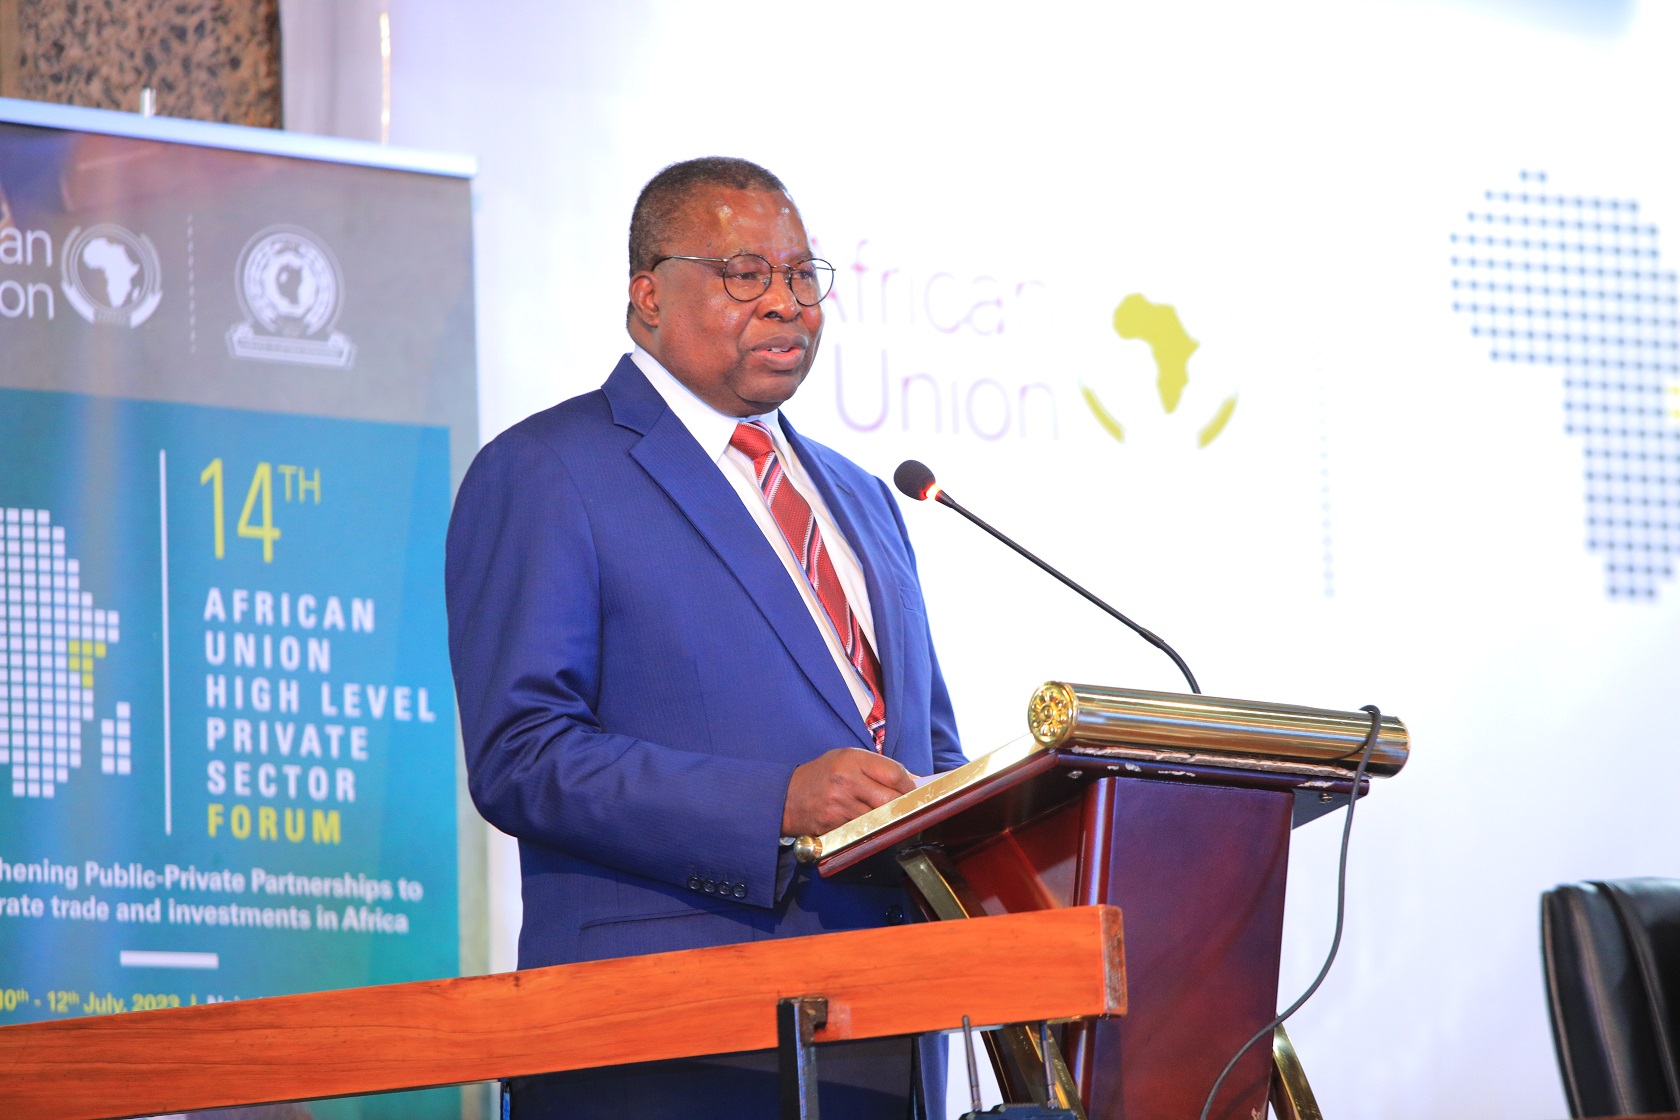  The African Union Commissioner of Economic Development, Trade, Tourism, Industry and Minerals speaks during the closing session of the 14th African Union High Level Private Sector in Nairobi.